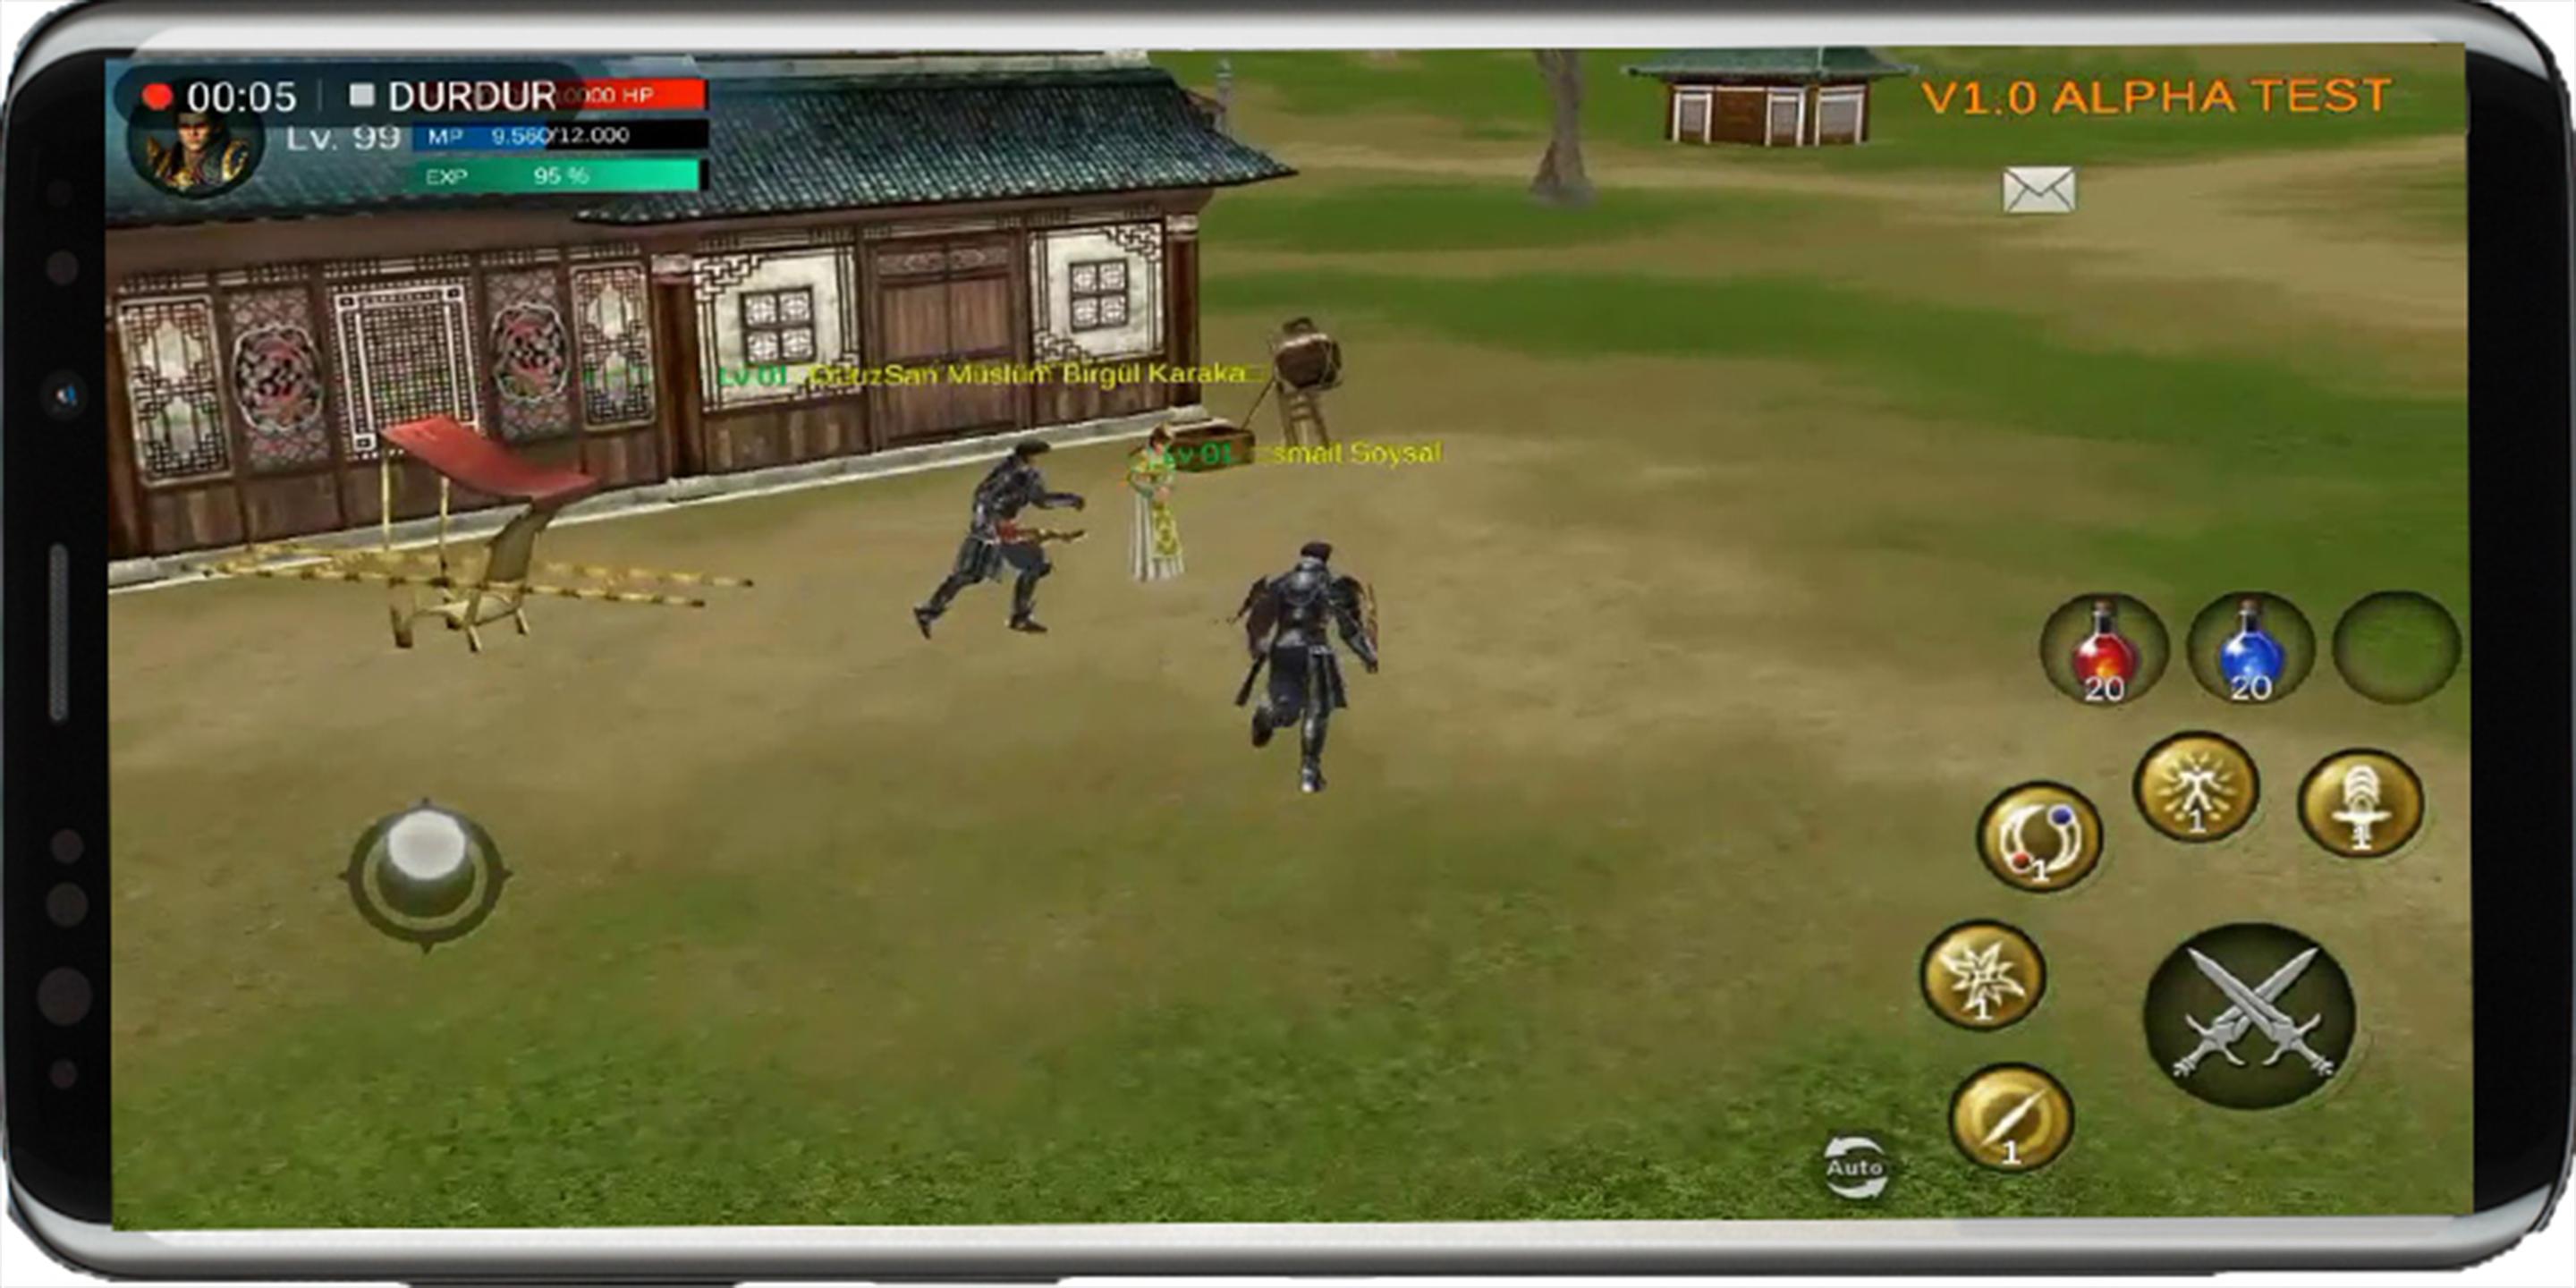 Metin 2 Mobile for Android - APK Download